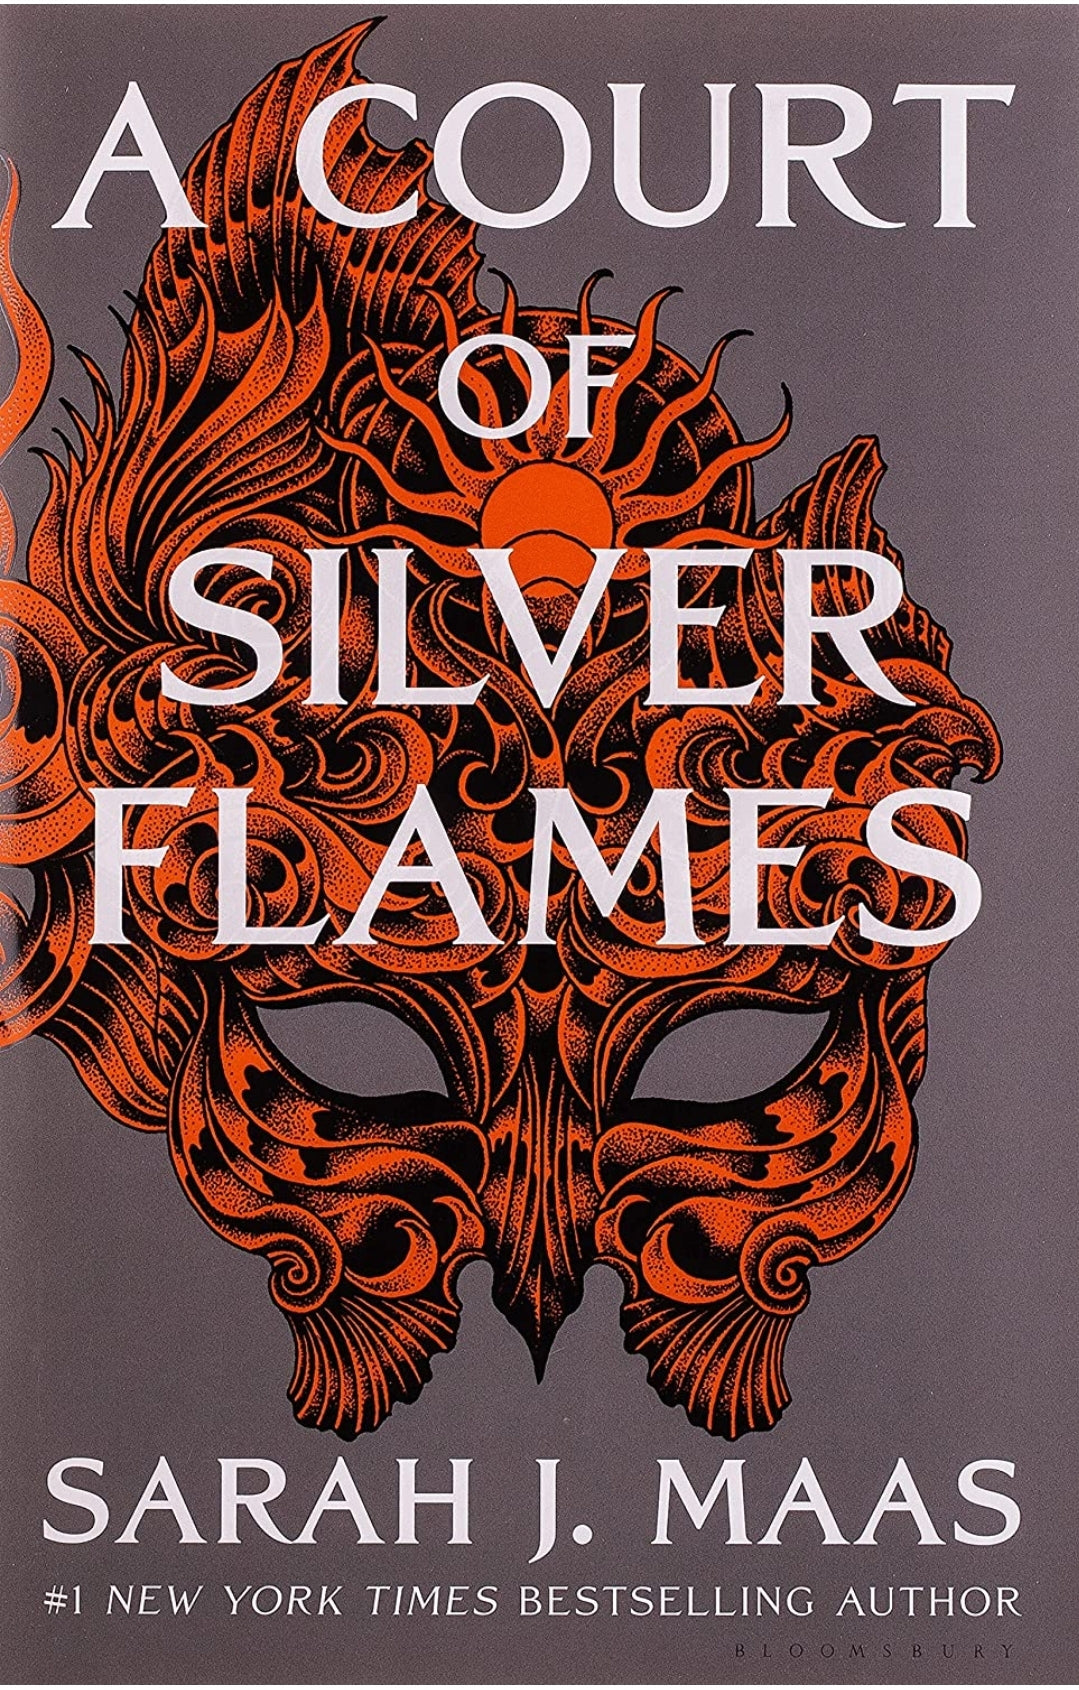 A Court of Silver Flames (Book 5)